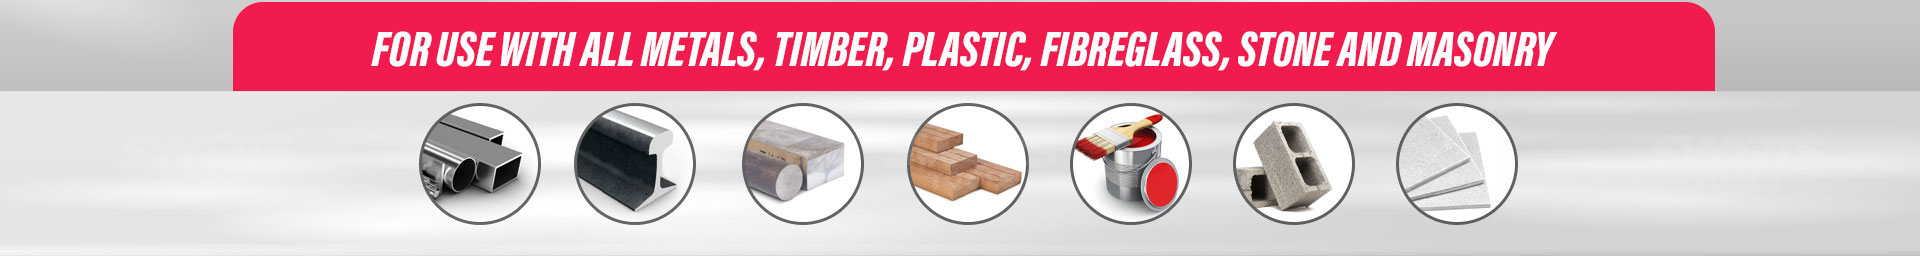 for use: with all metals, timber, plastic, fibreglass, stone and masonry